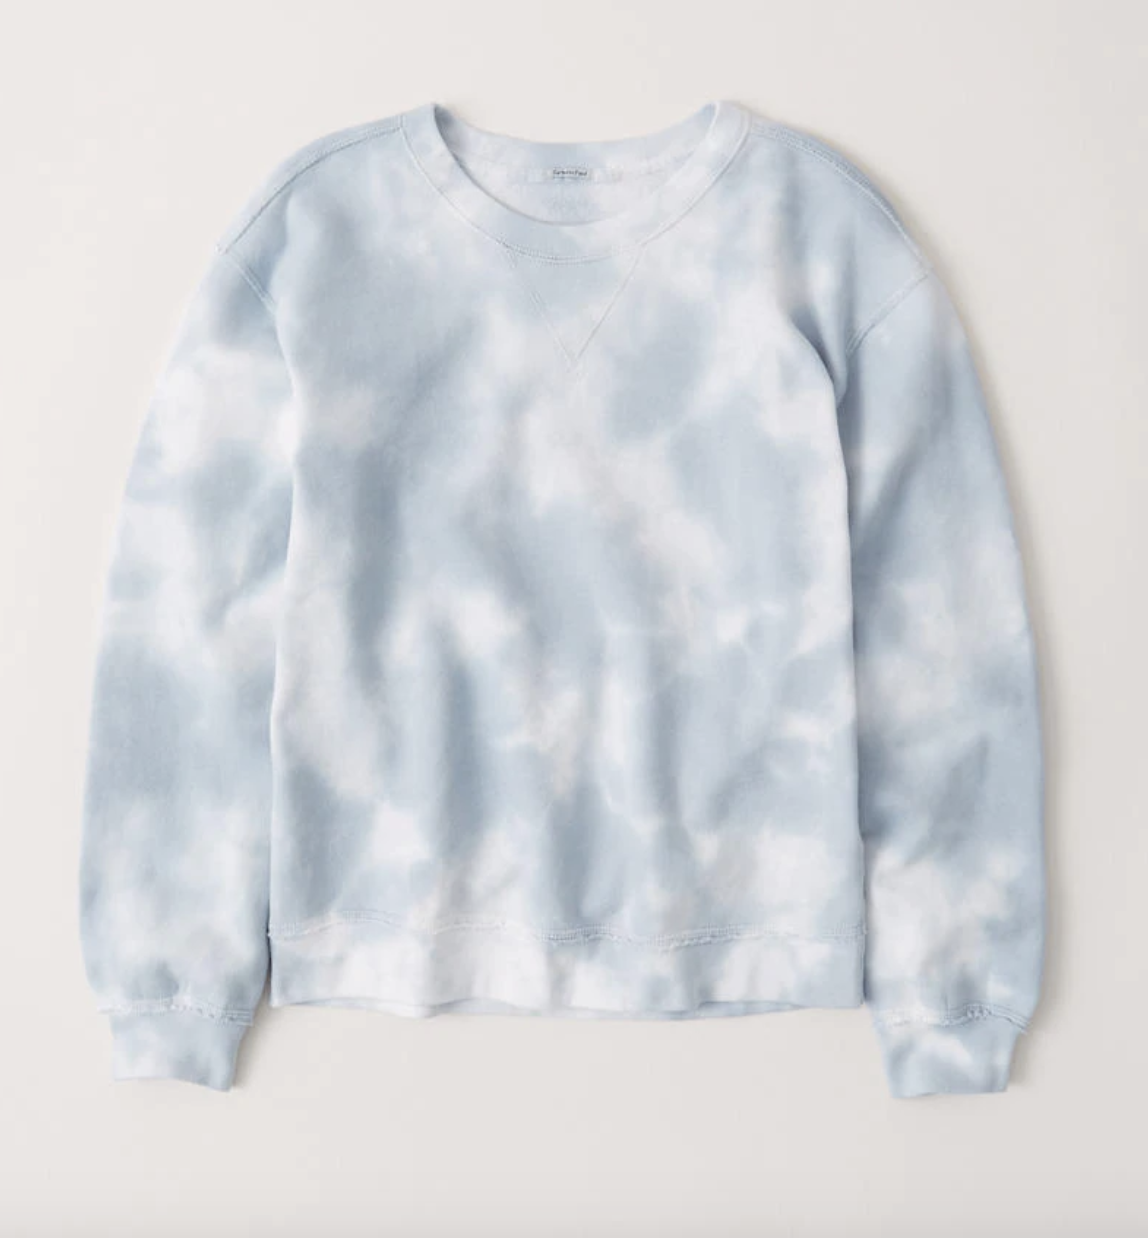 TIE DYE TRENDS blue and white sweater 